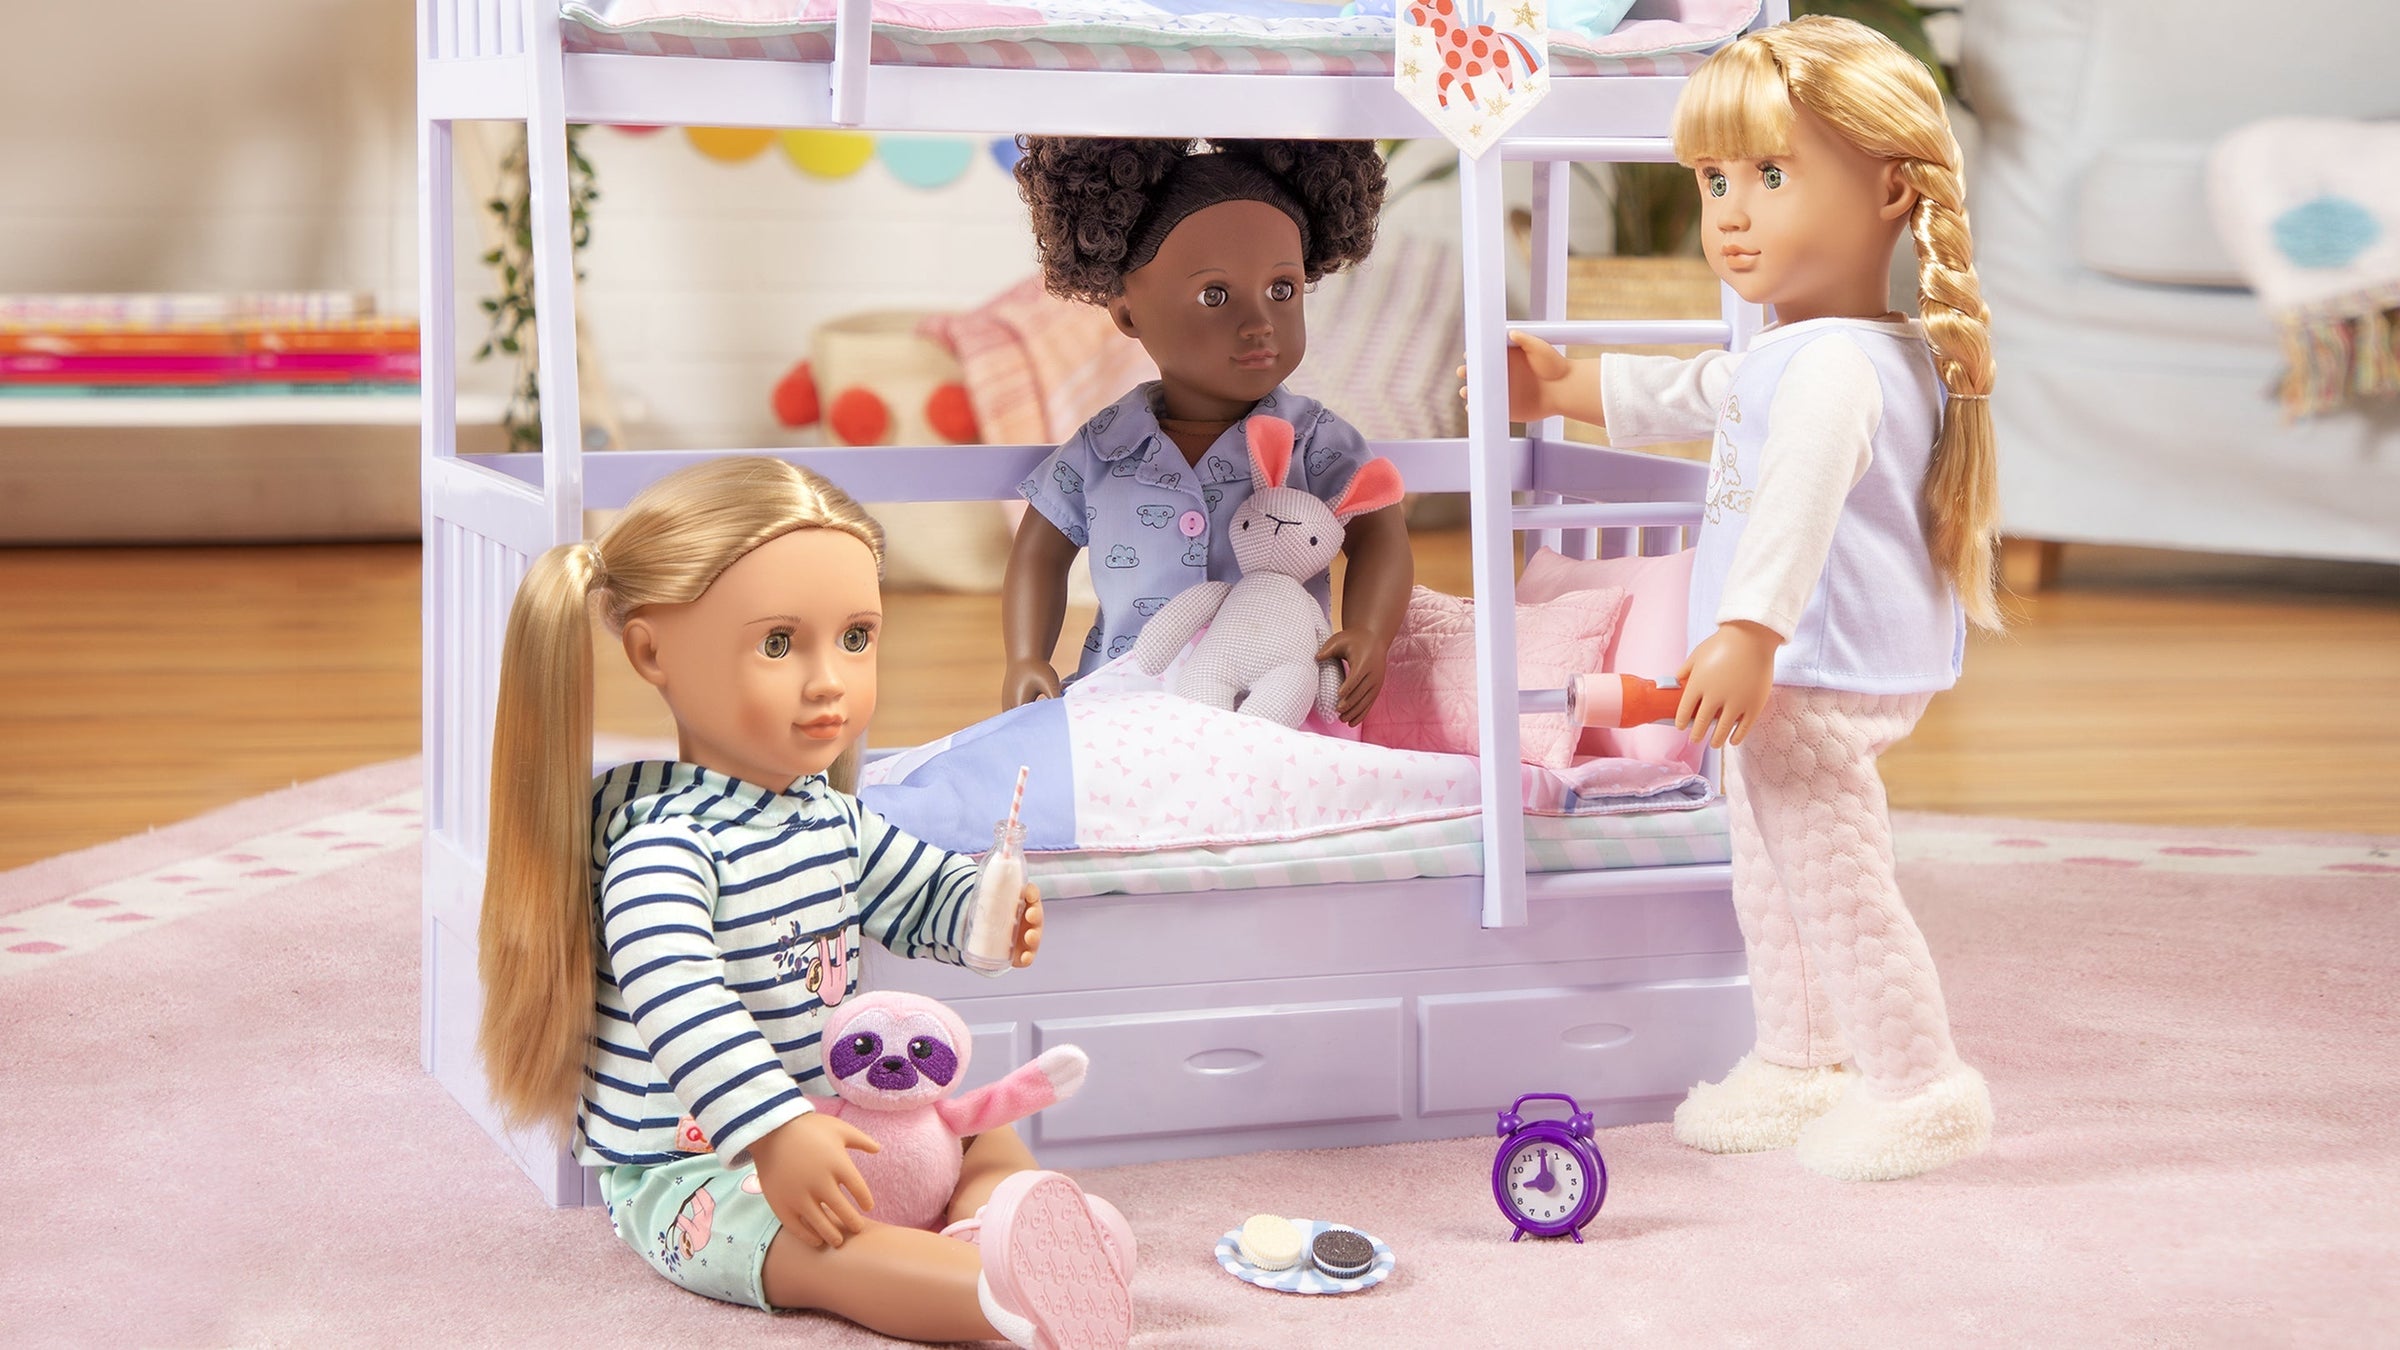 Sleepover - Doll Accessories for Sleepovers - Doll Beds & Pyjama Sets - Our Generation UK